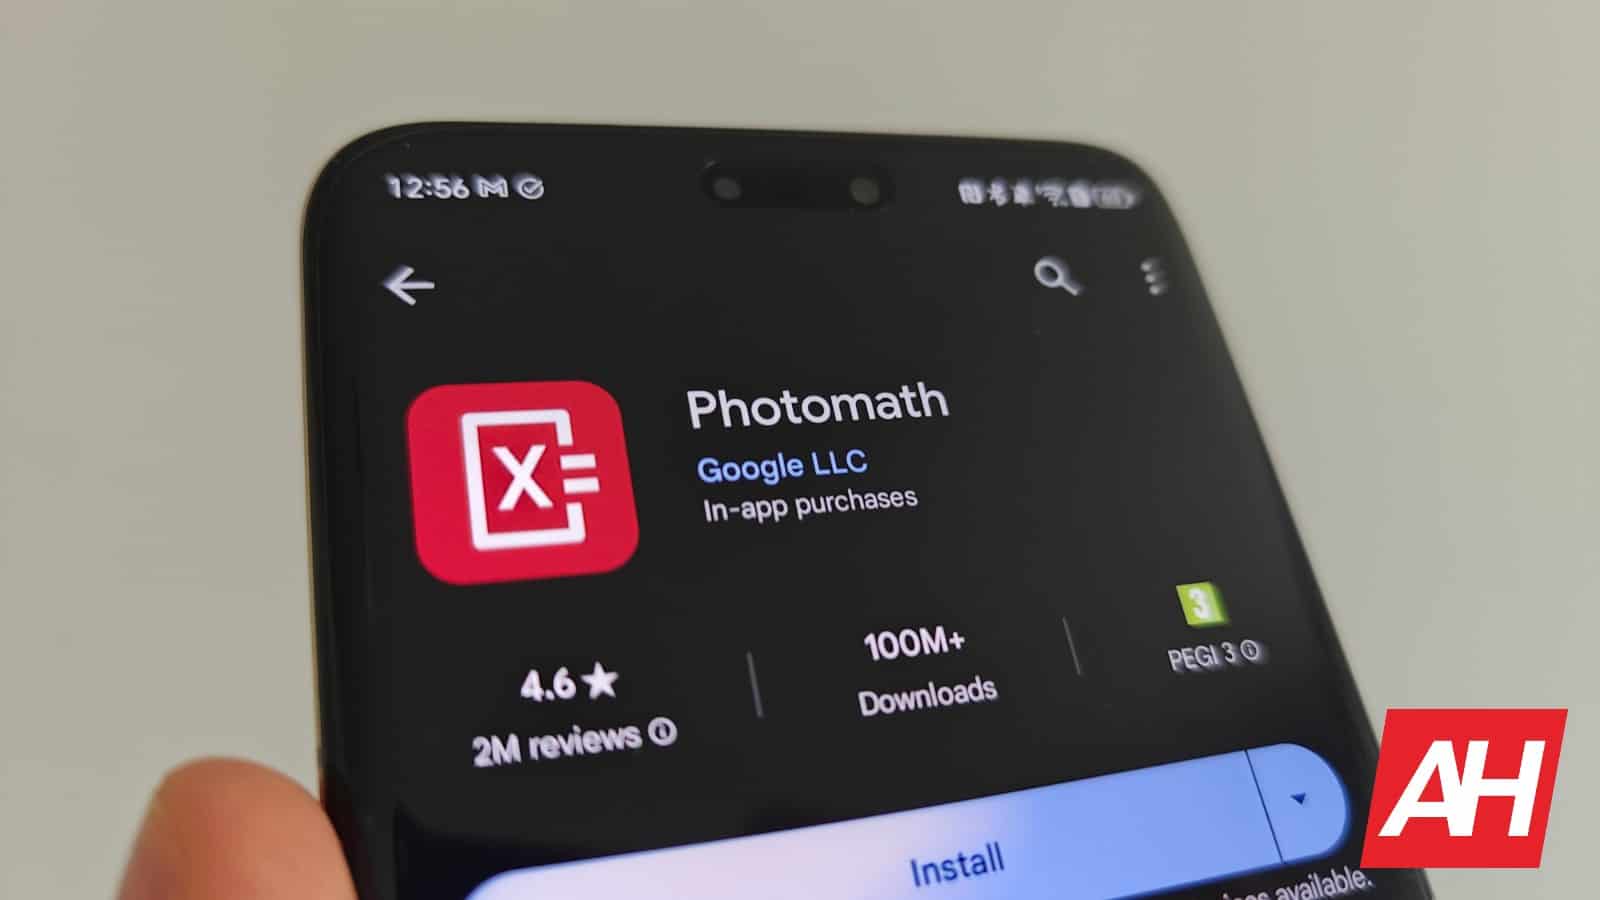 Featured image for Google makes Photomath acquisition official on Play Store